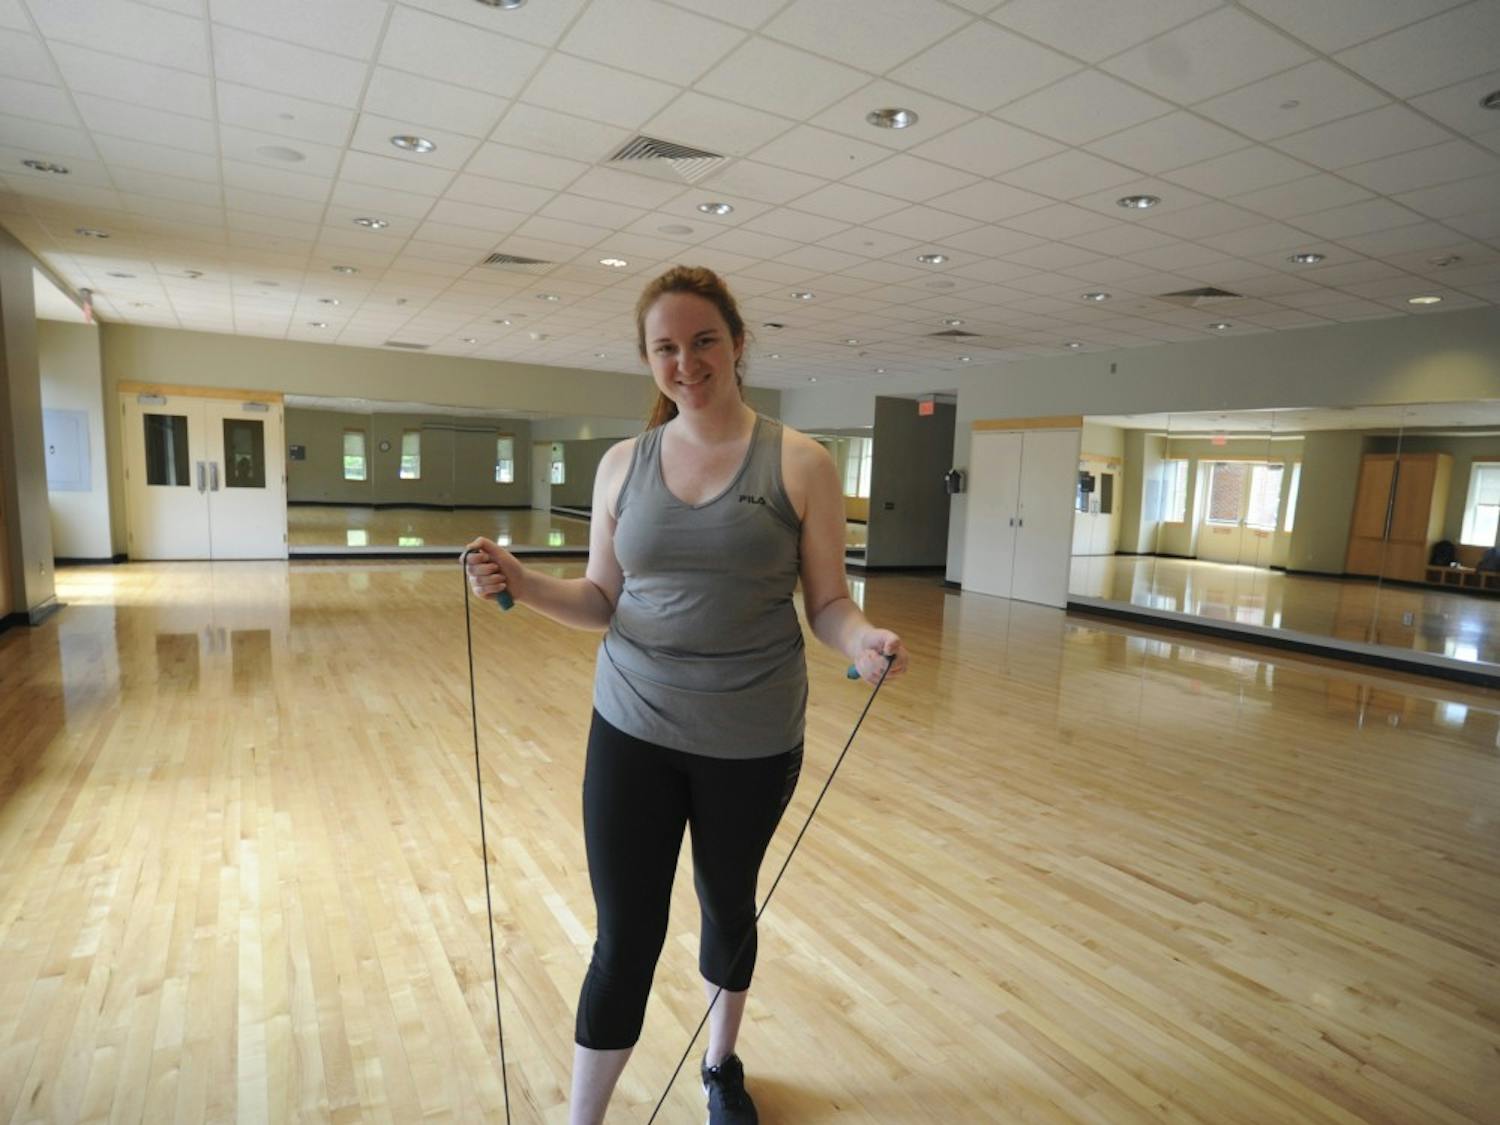 First-year music major Lauren Ragsdale likes to use the on-campus gyms to jump rope as a way to stay active. She is pictured preparing to start a jump-rope based workout routine in a studio room in Ram's Head Gym at the University of North Carolina at Chapel Hill on Wednesday April, 24, 2019.